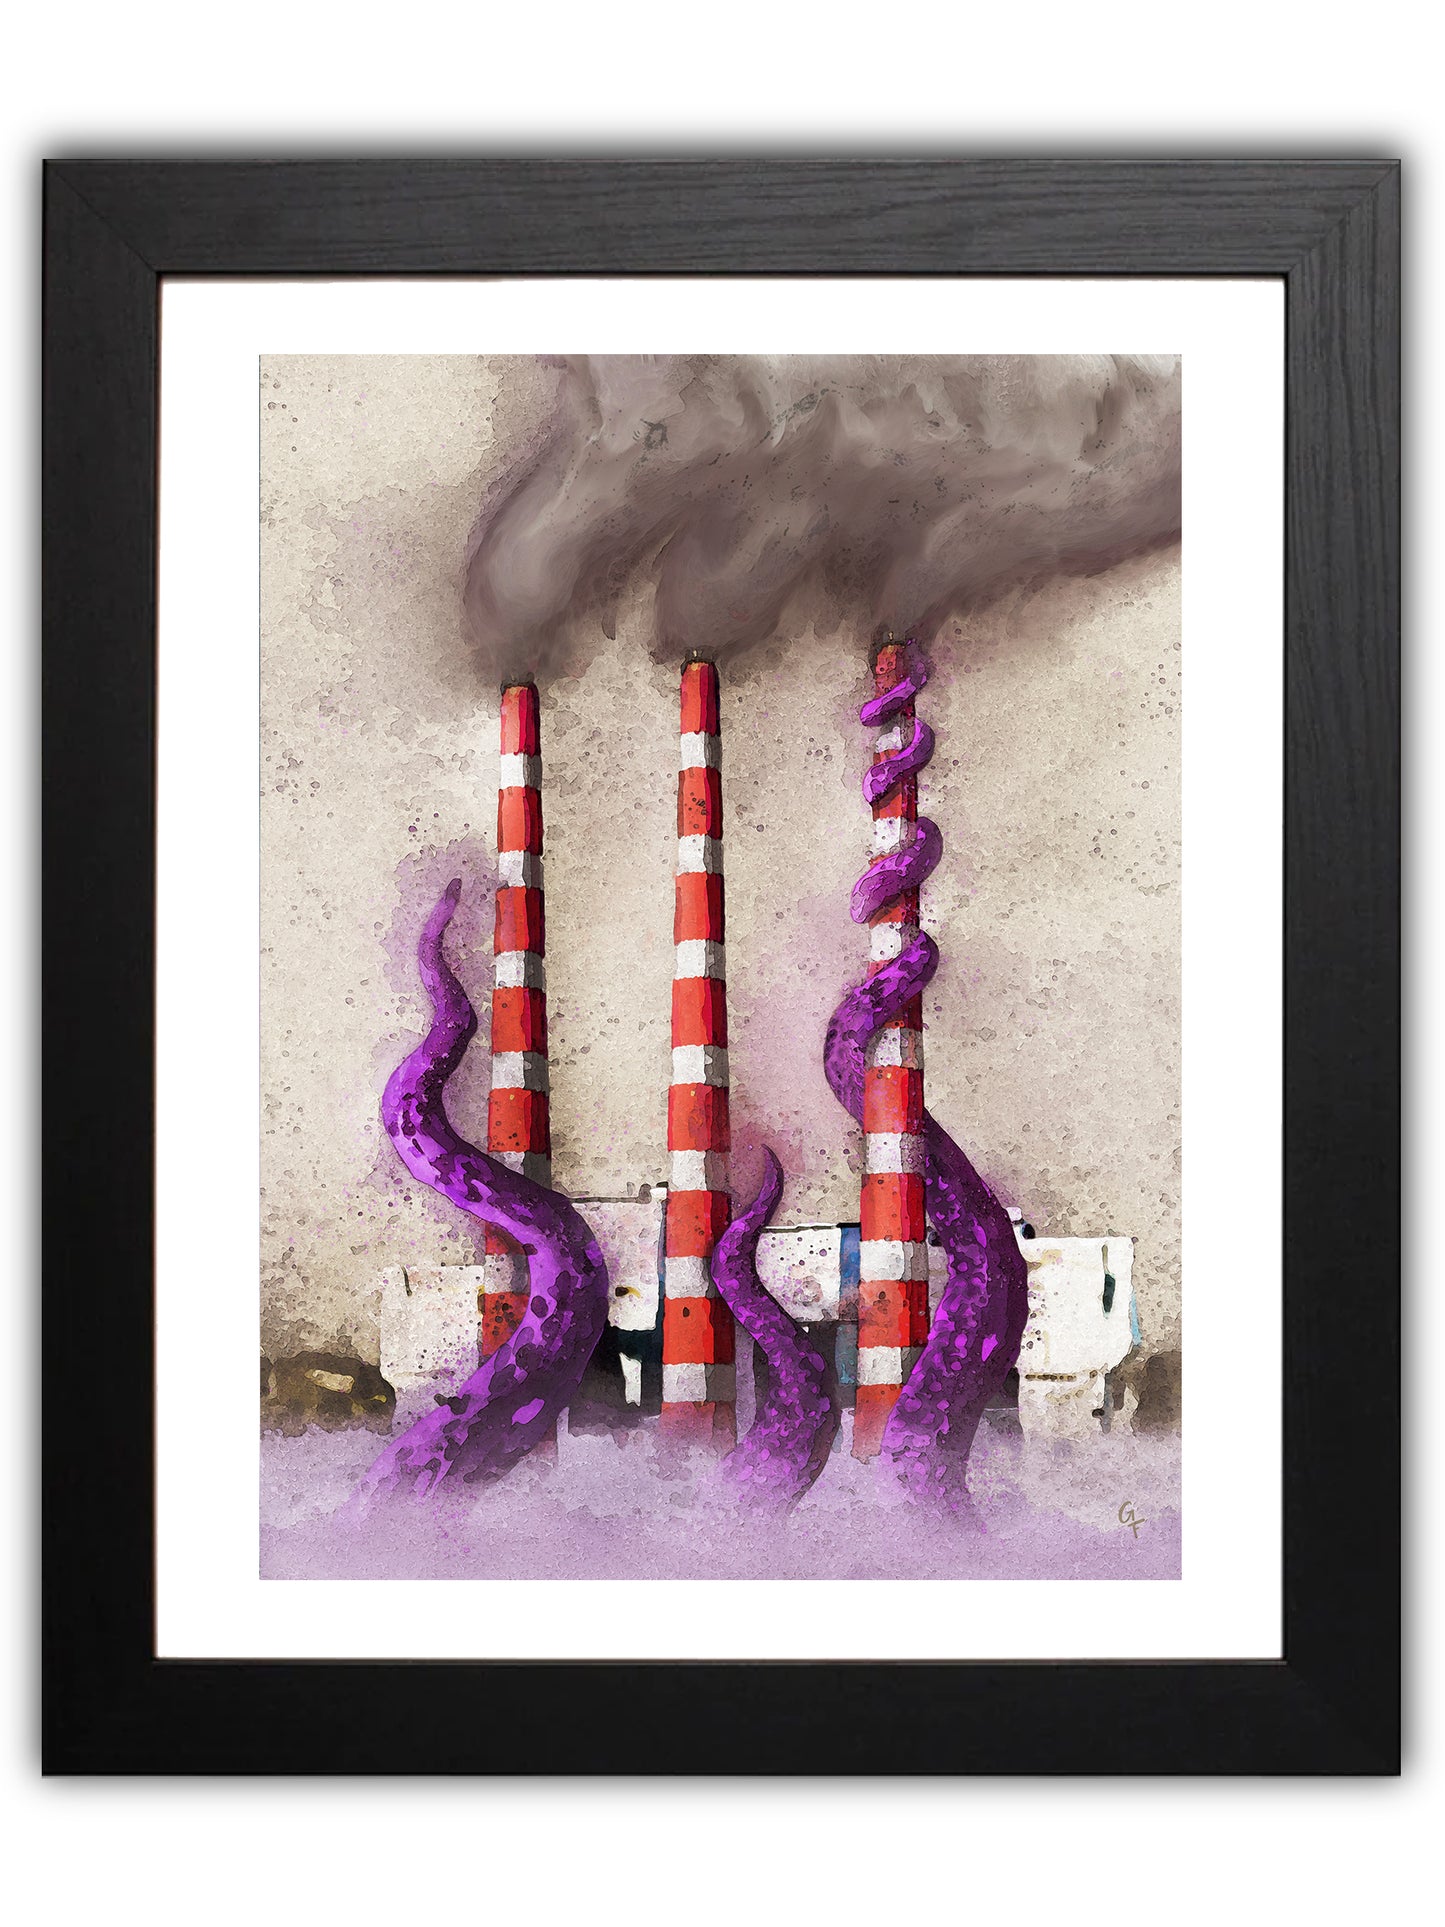 Dartmouth smoke stacks, being attacked by purple tentacles